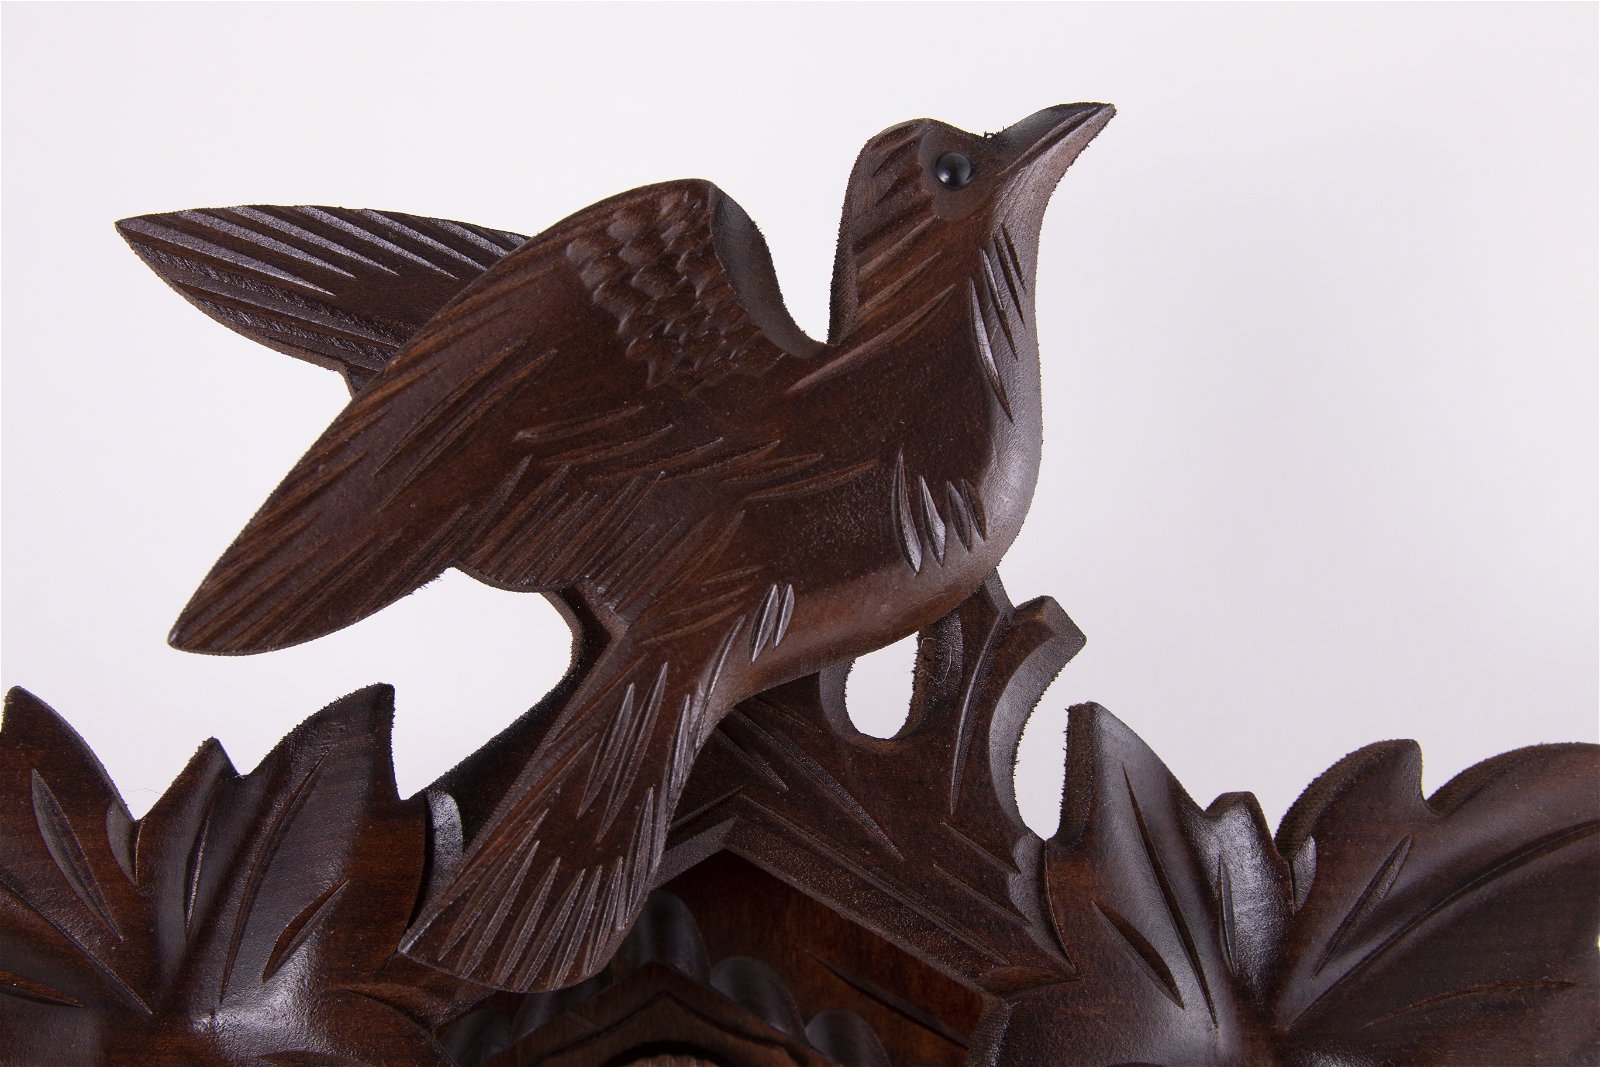 Cuckoo Clock 8-day-movement Carved-Style 40cm by Hekas